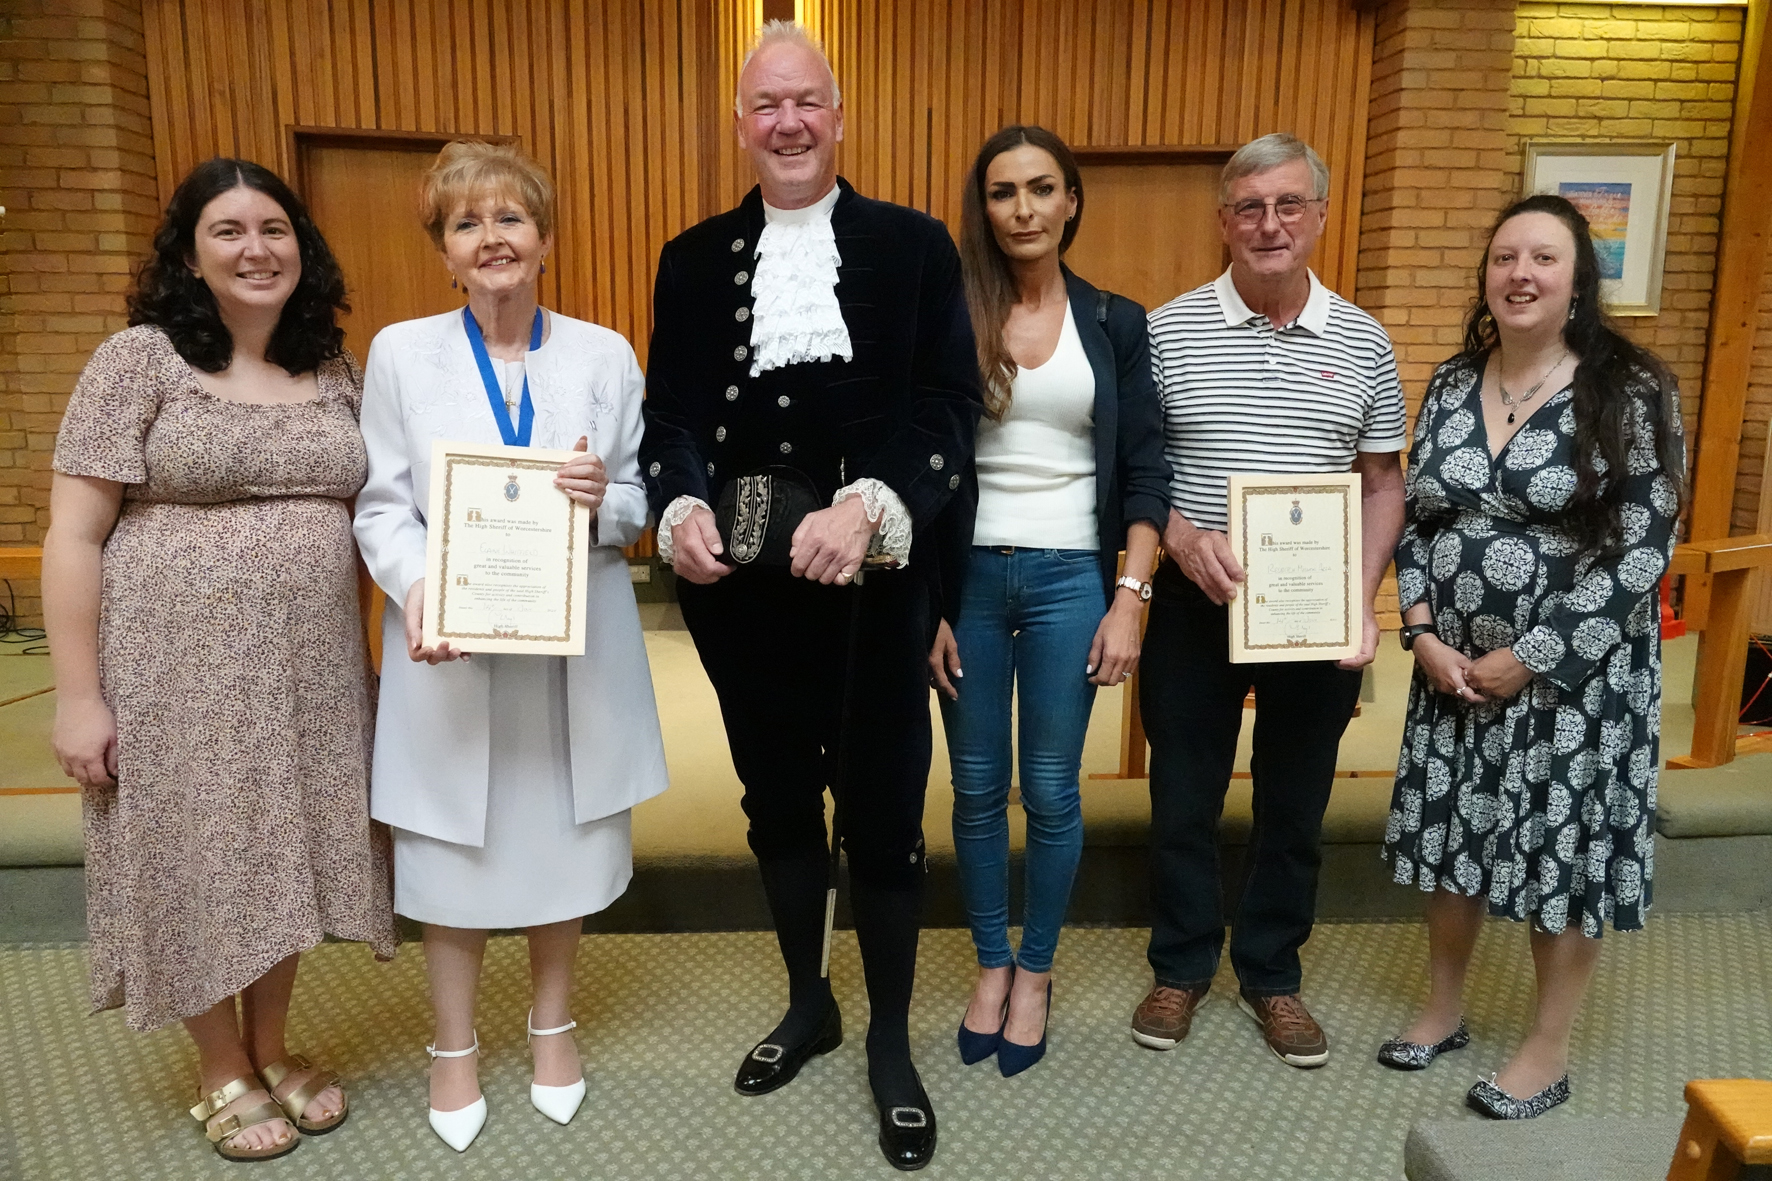 The High Sheriff with award winners from Redditch